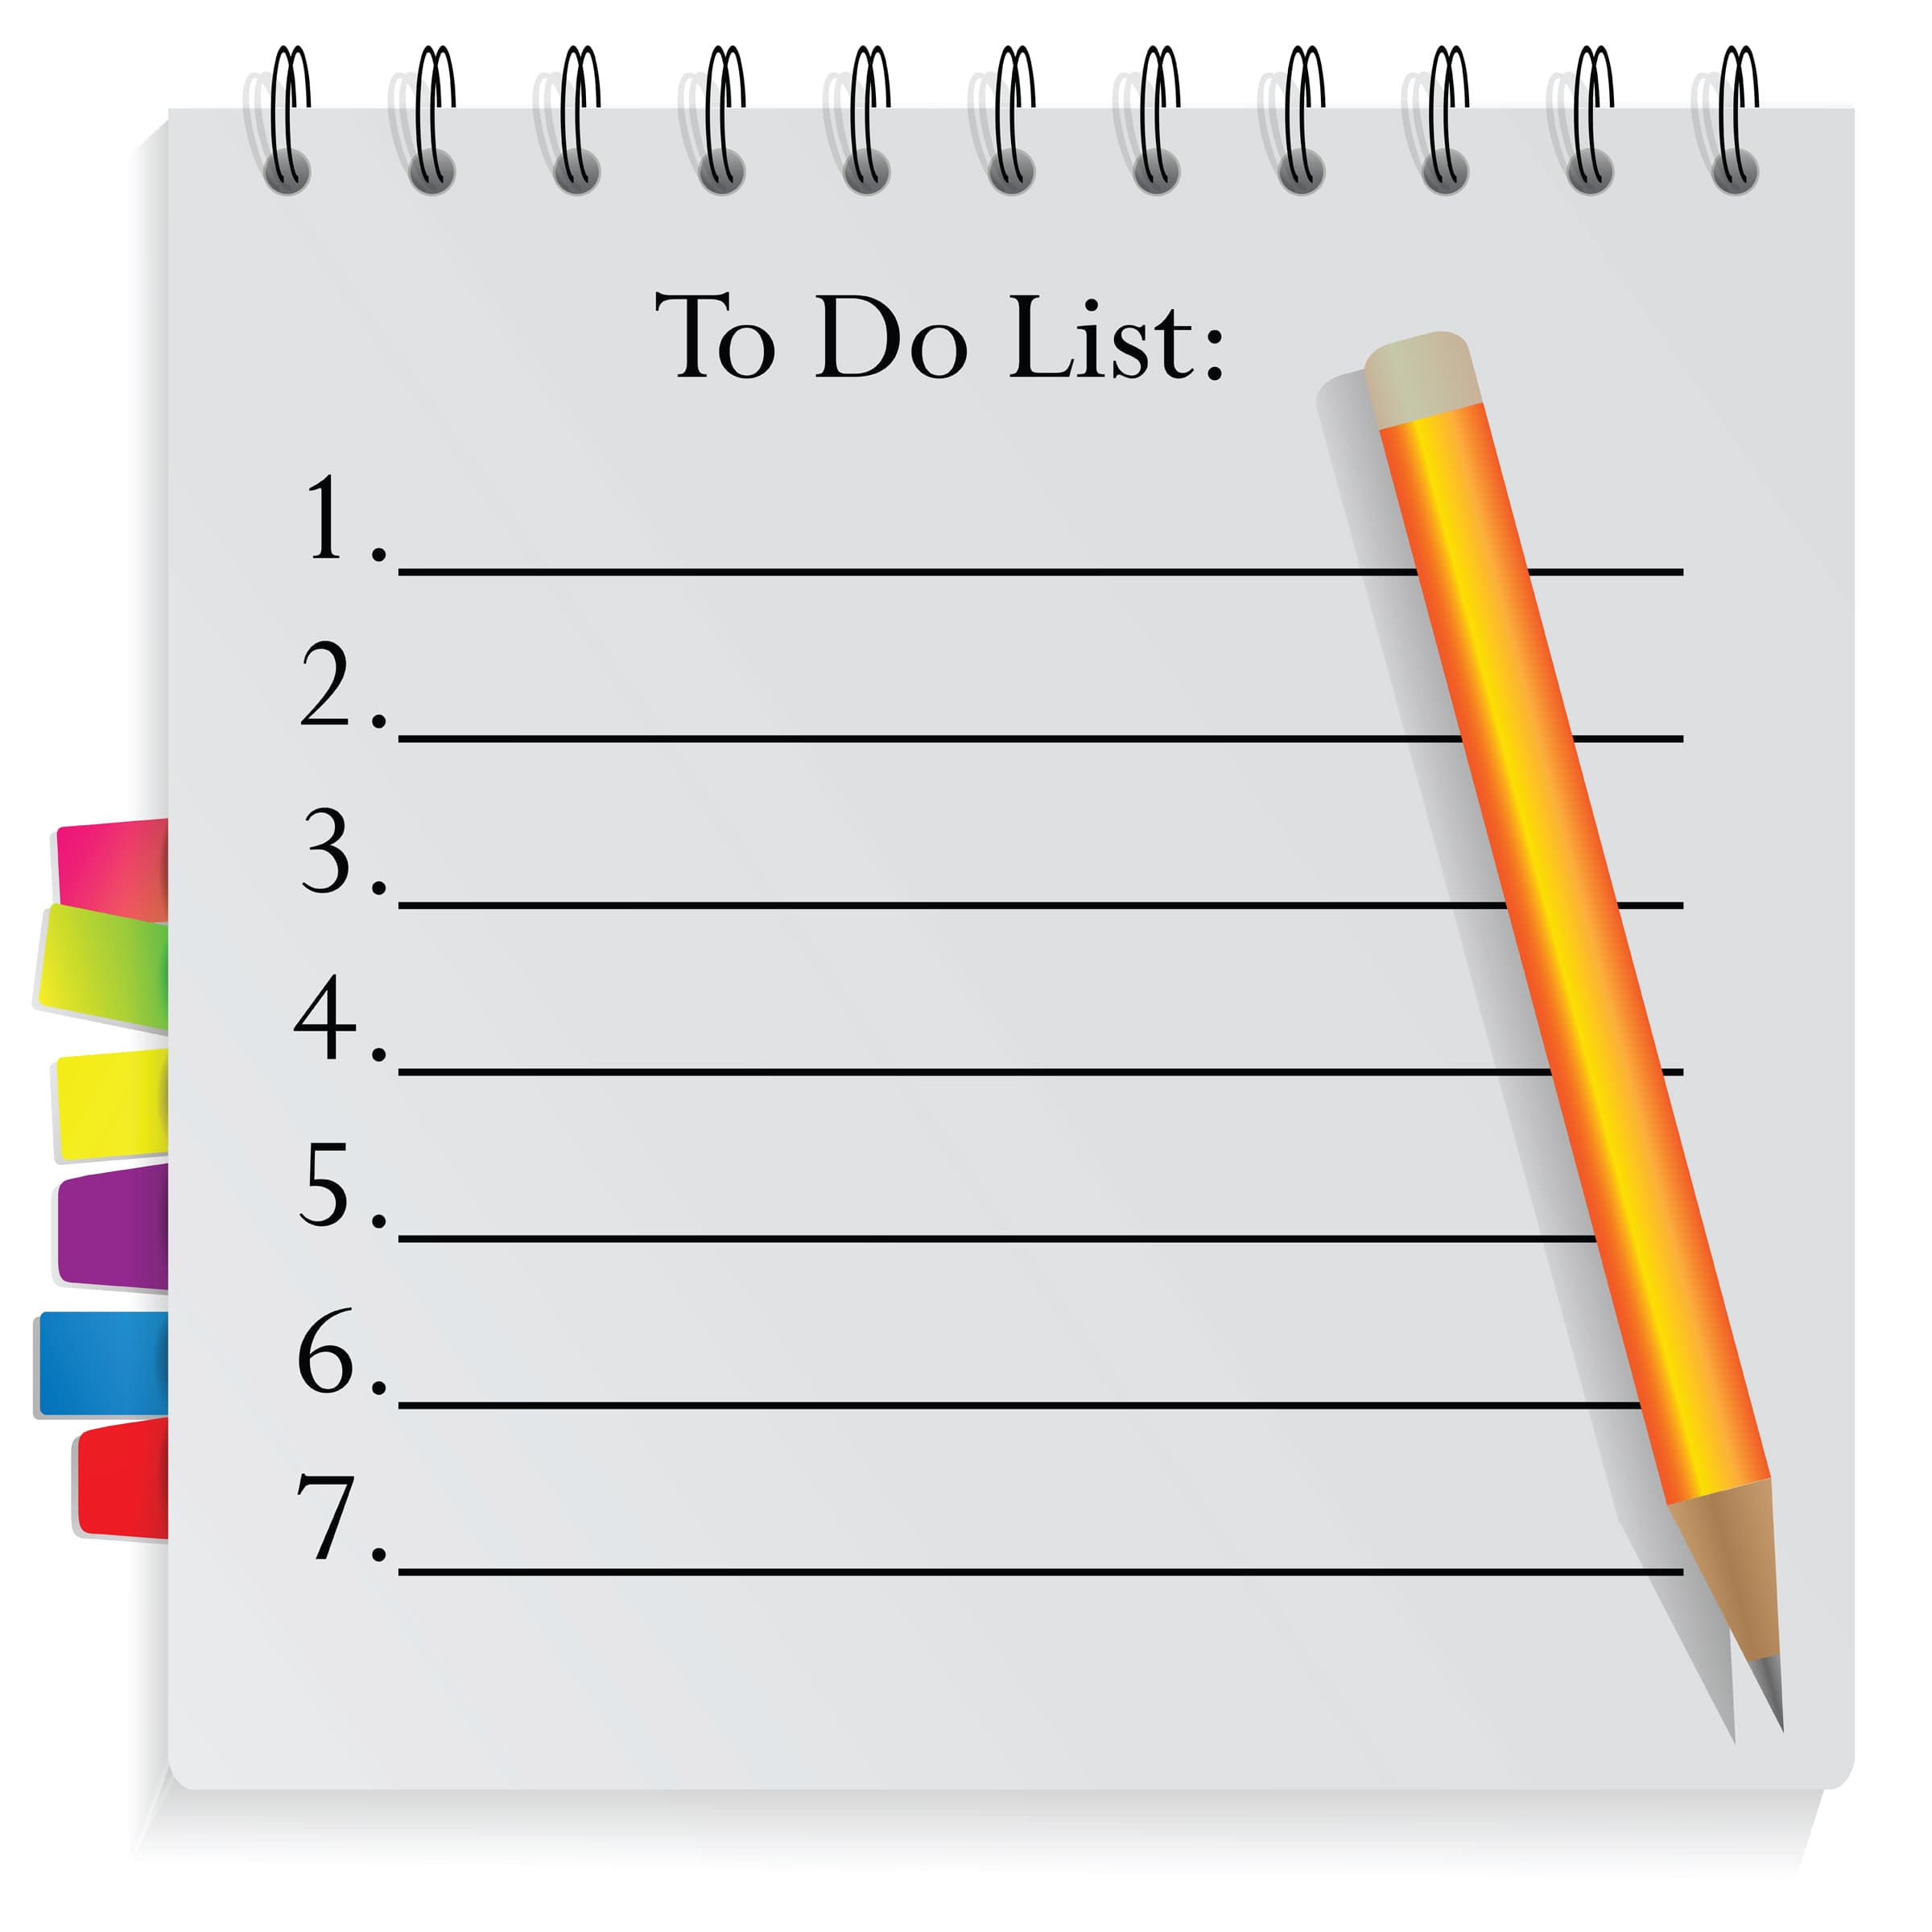 Let’s skip the To-Do list!